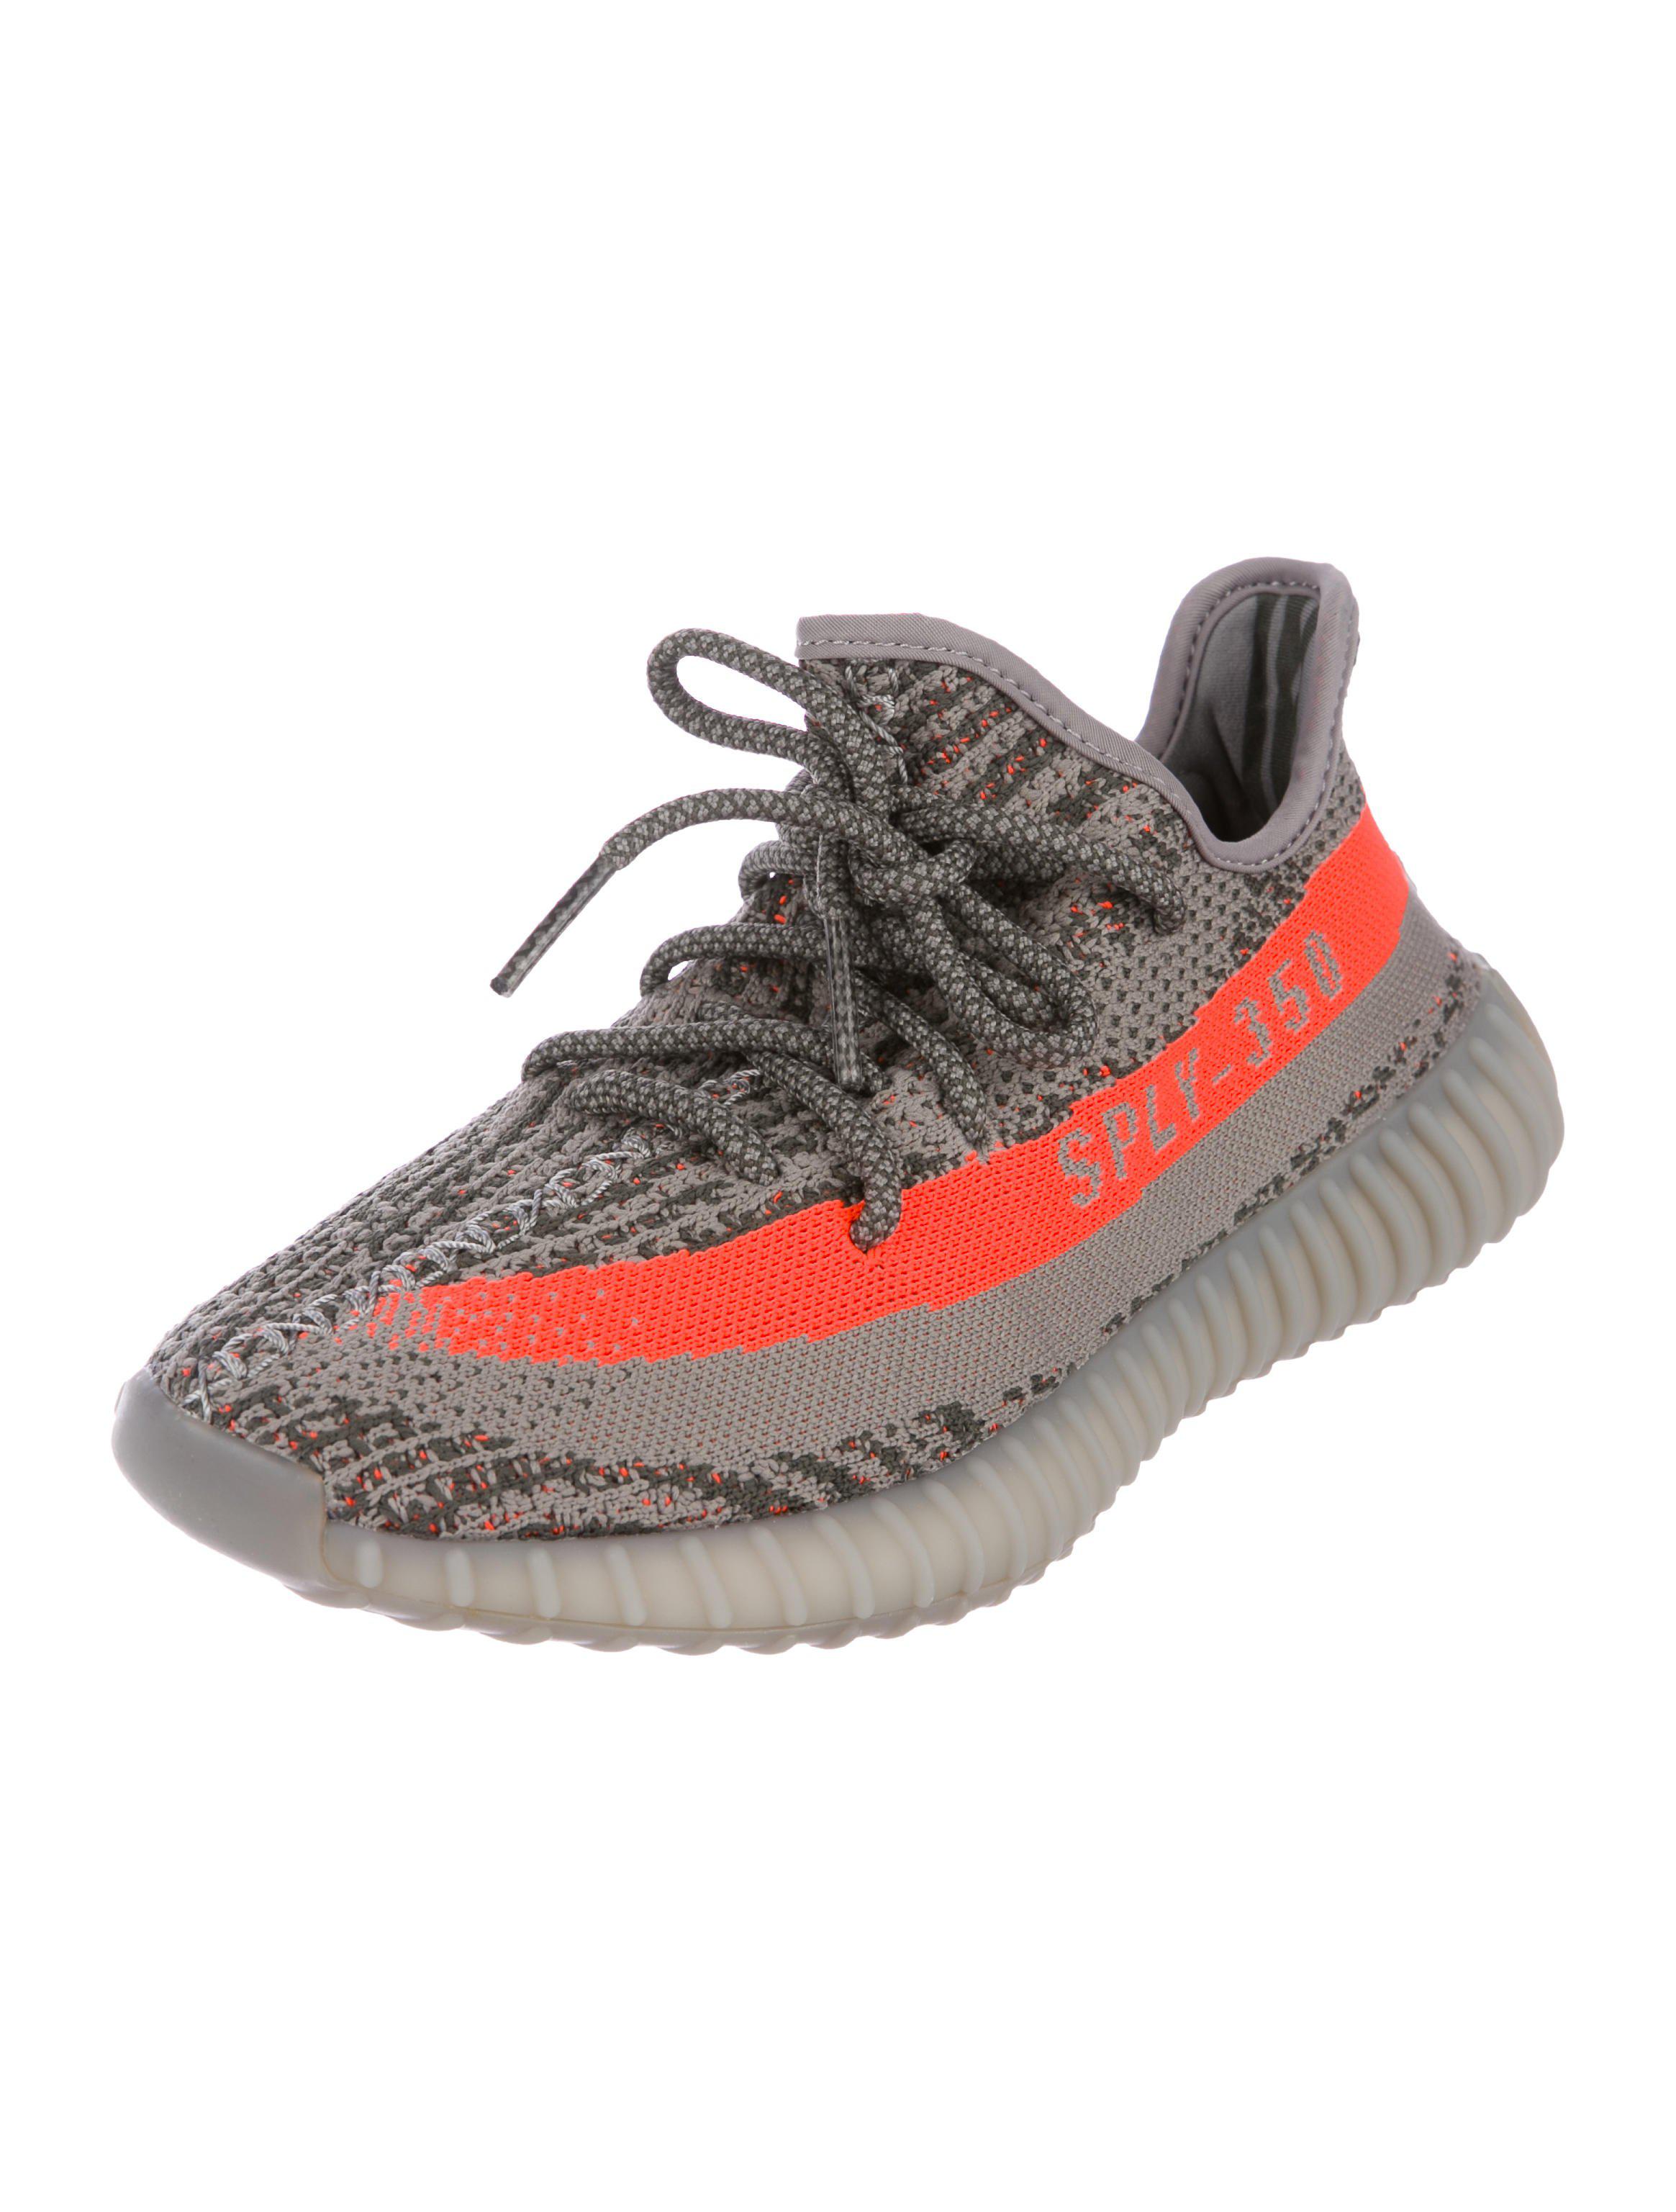 Lyst - Yeezy 2017 350 V2 Beluga Boost Sneakers W/ Tags in Gray for Men